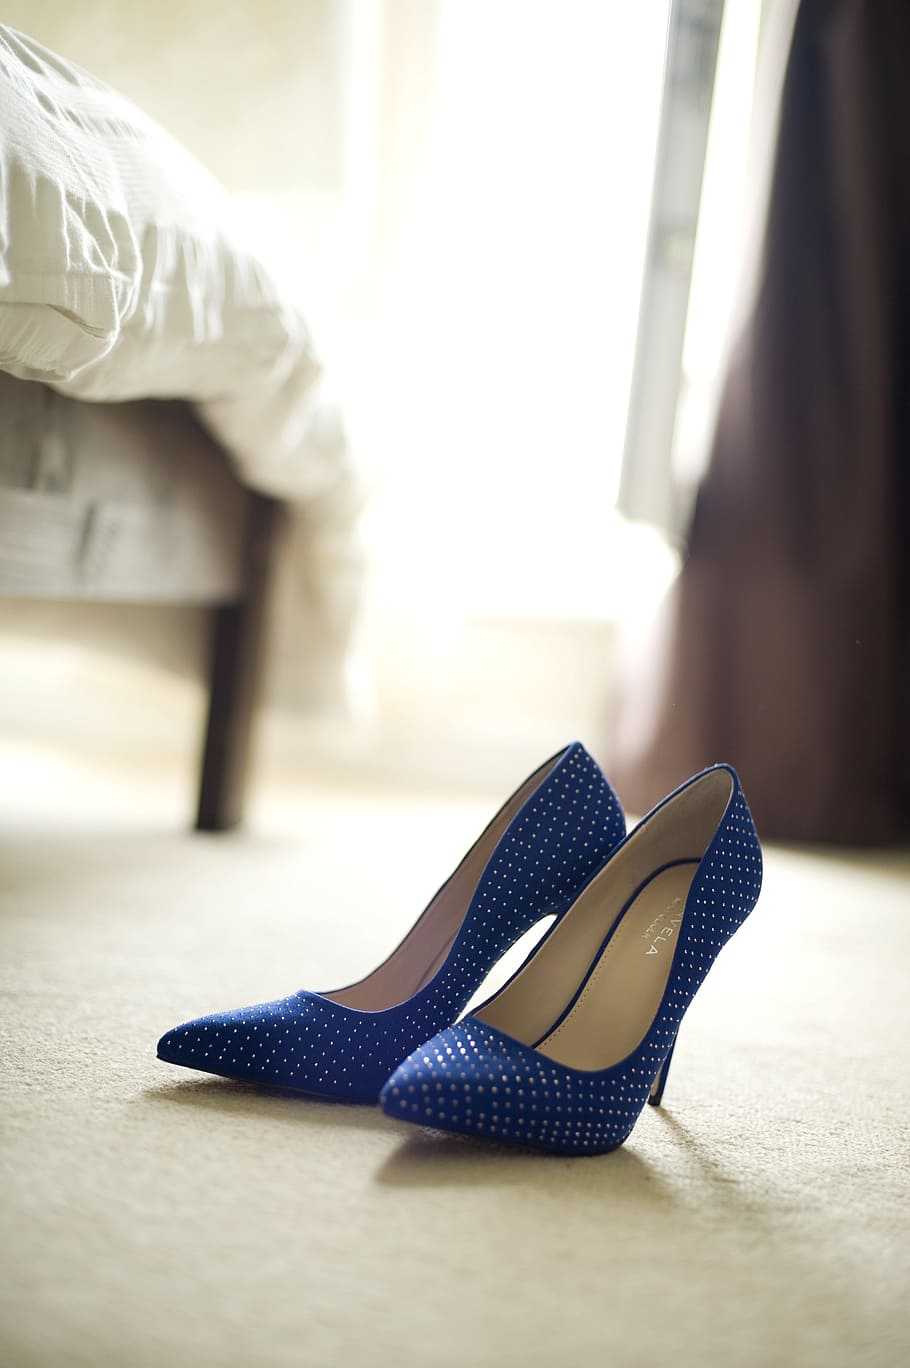 pair, blue-and-beige, polka-dot, leather, pointed-toe, stiletto, pumps, stilettos, shoes, heels